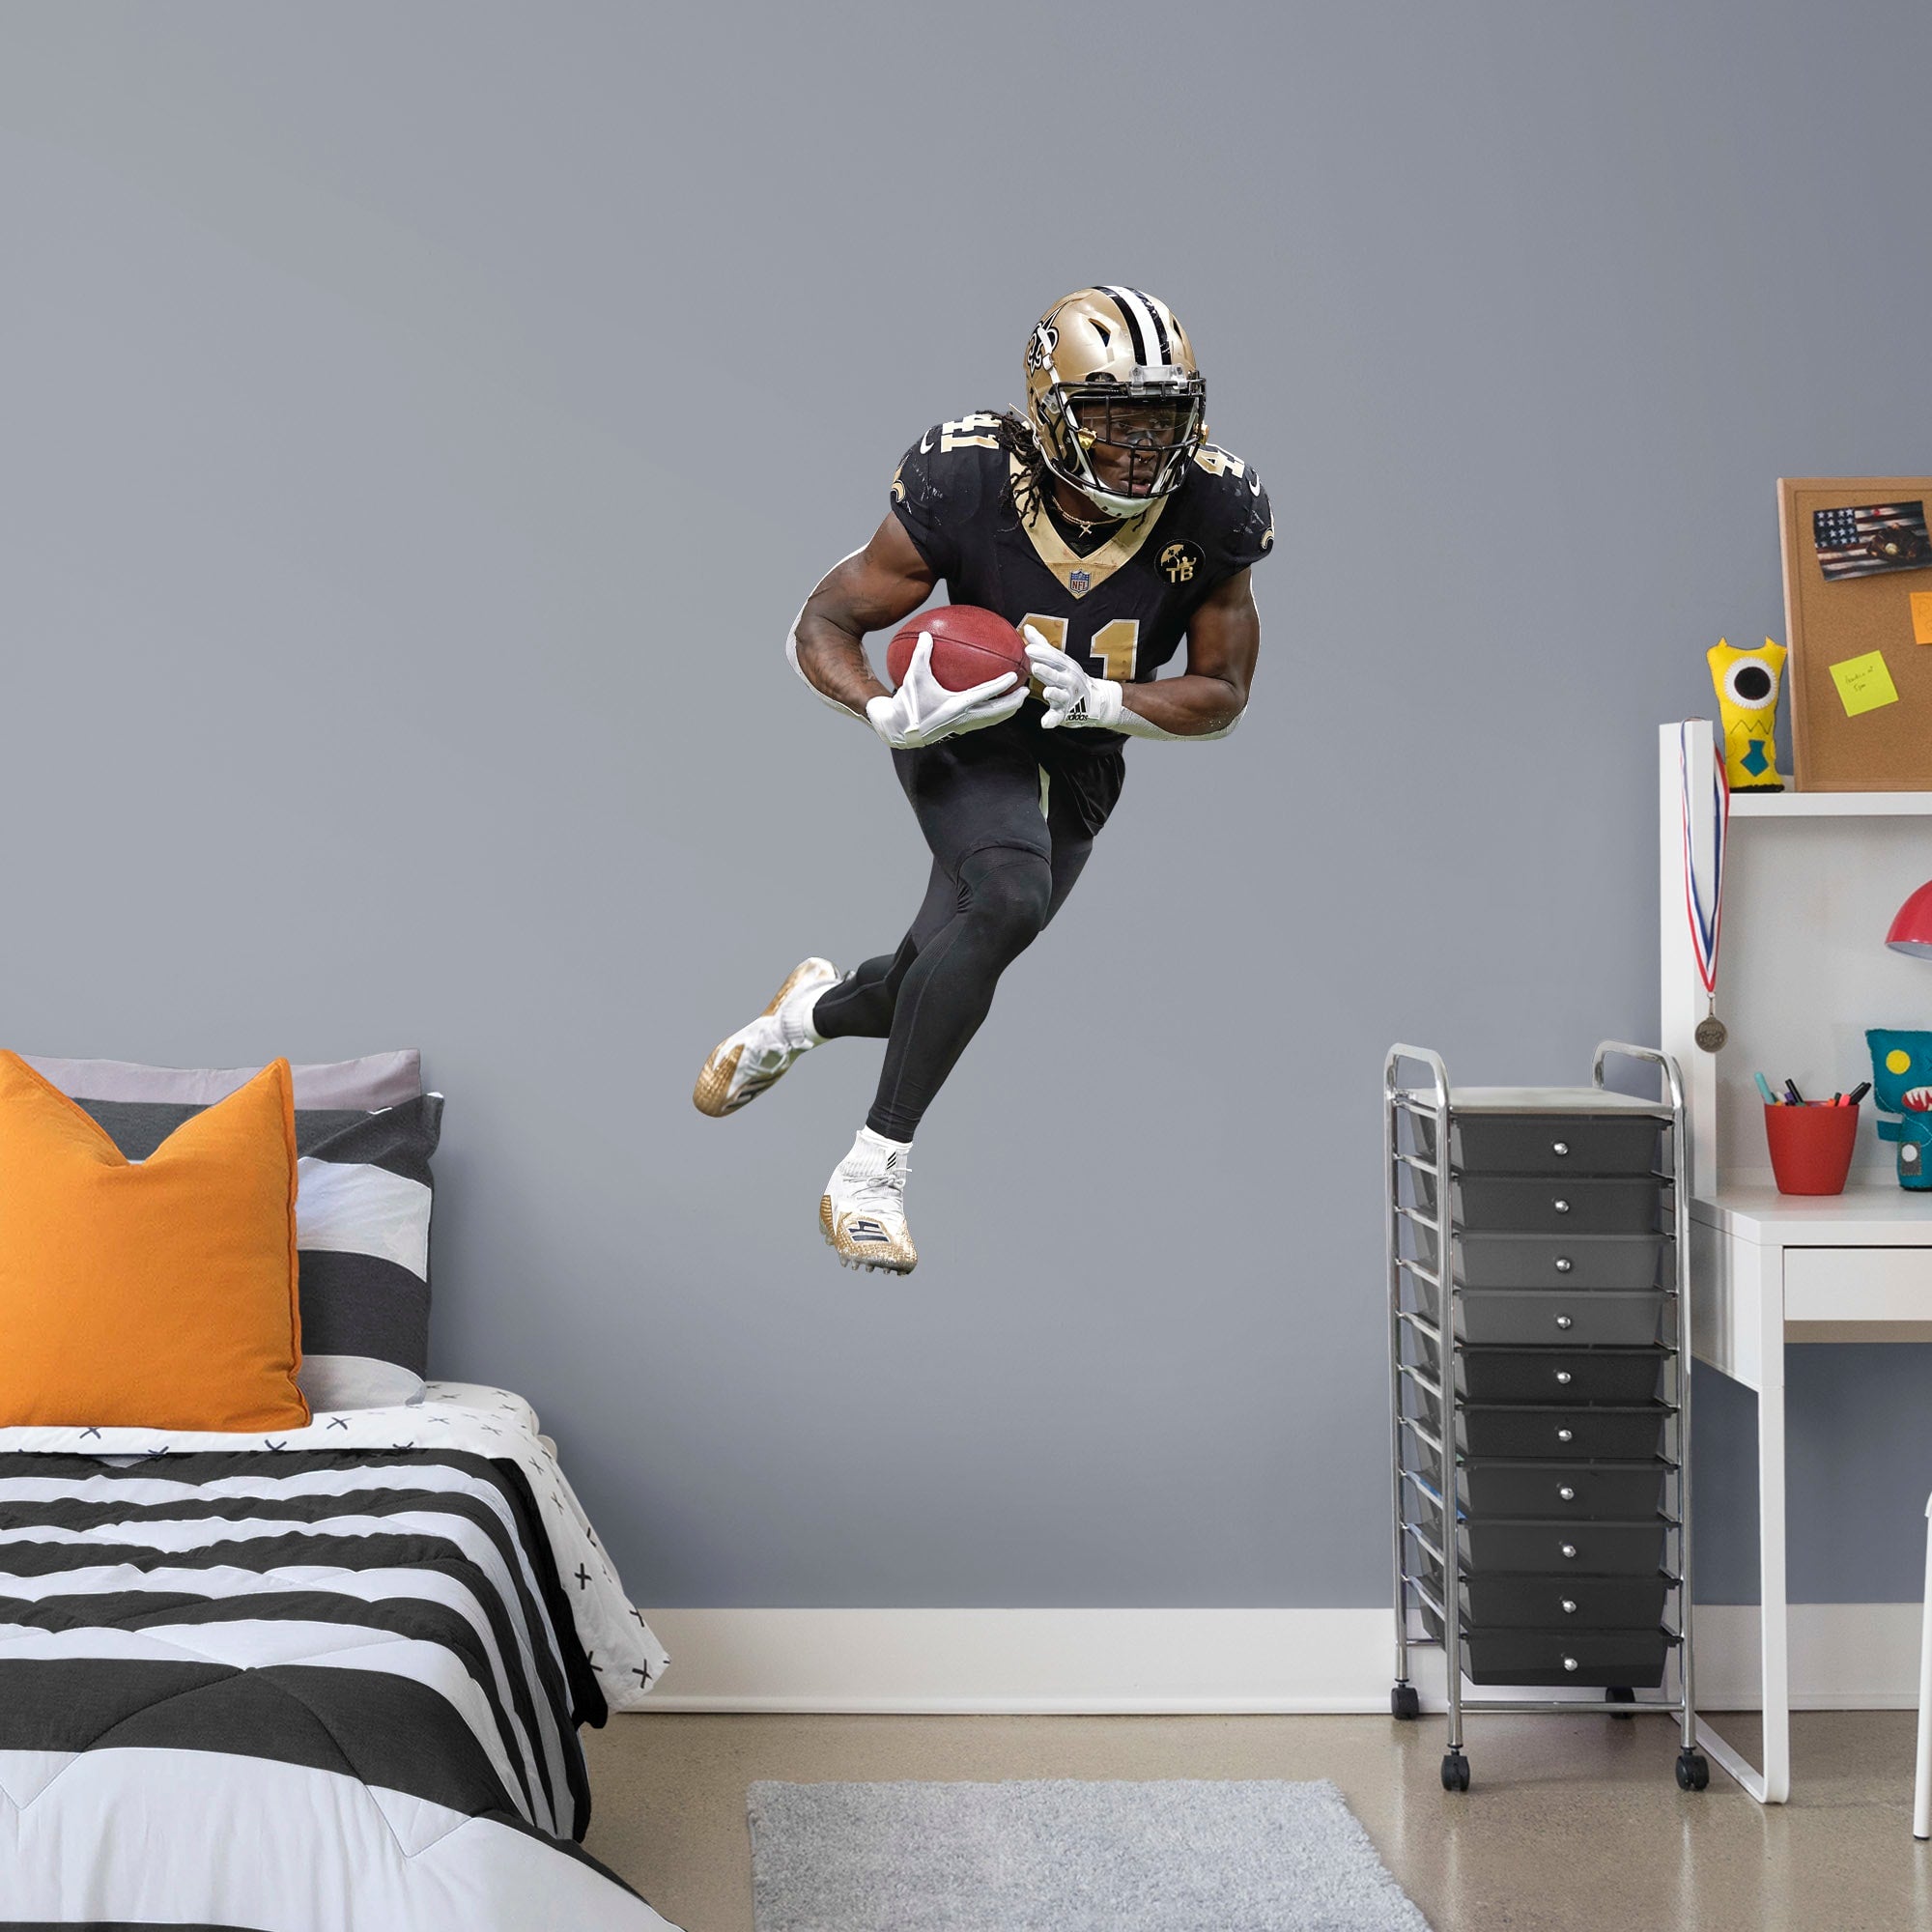 Alvin Kamara for New Orleans Saints - Officially Licensed NFL Removable Wall Decal Giant Athlete + 2 Decals (30"W x 51"H) by Fat